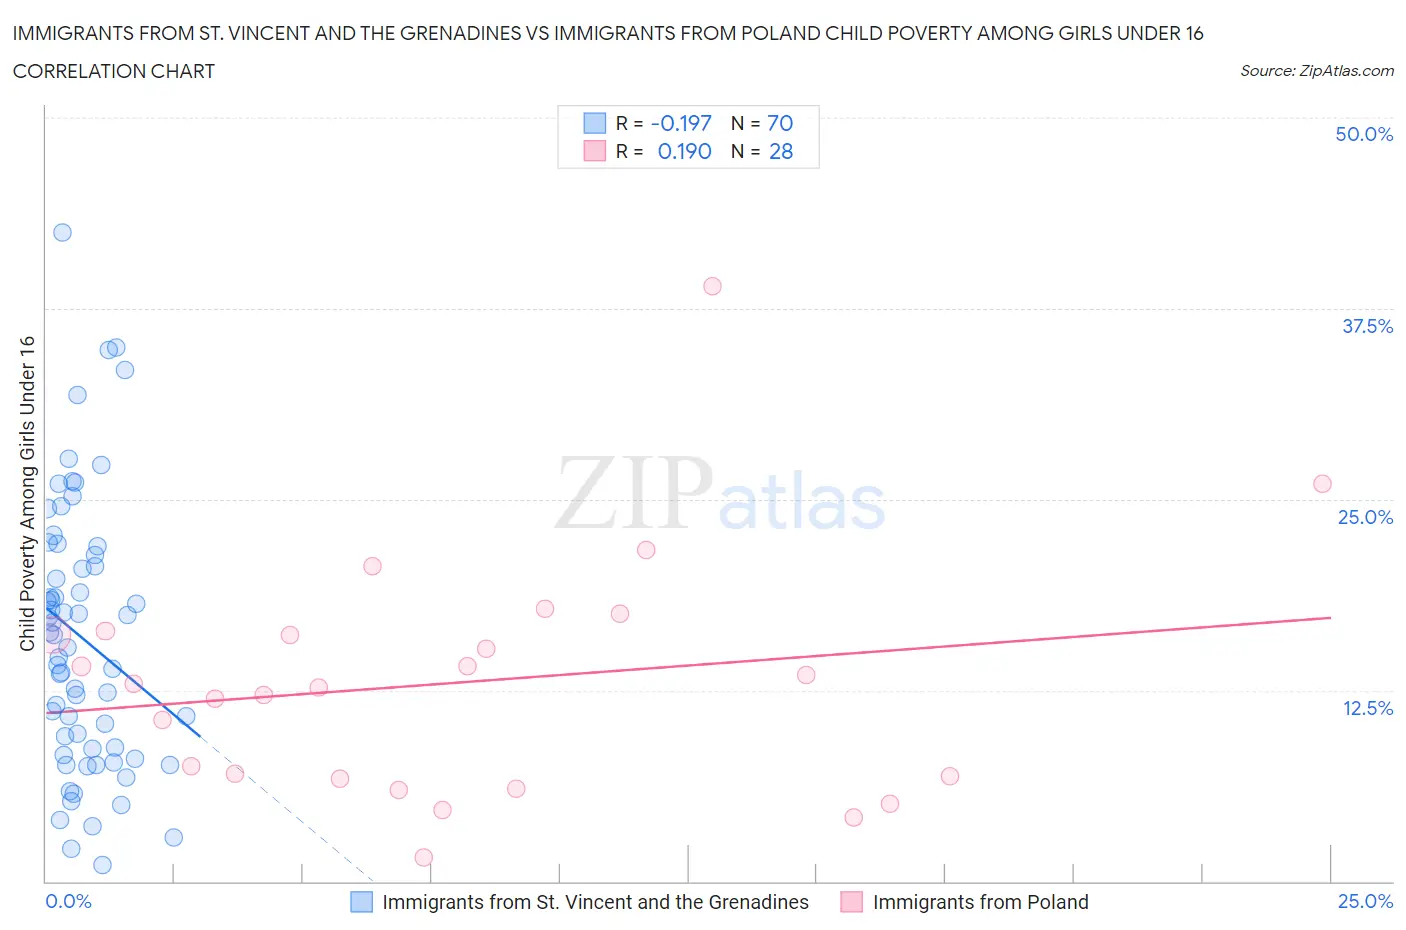 Immigrants from St. Vincent and the Grenadines vs Immigrants from Poland Child Poverty Among Girls Under 16